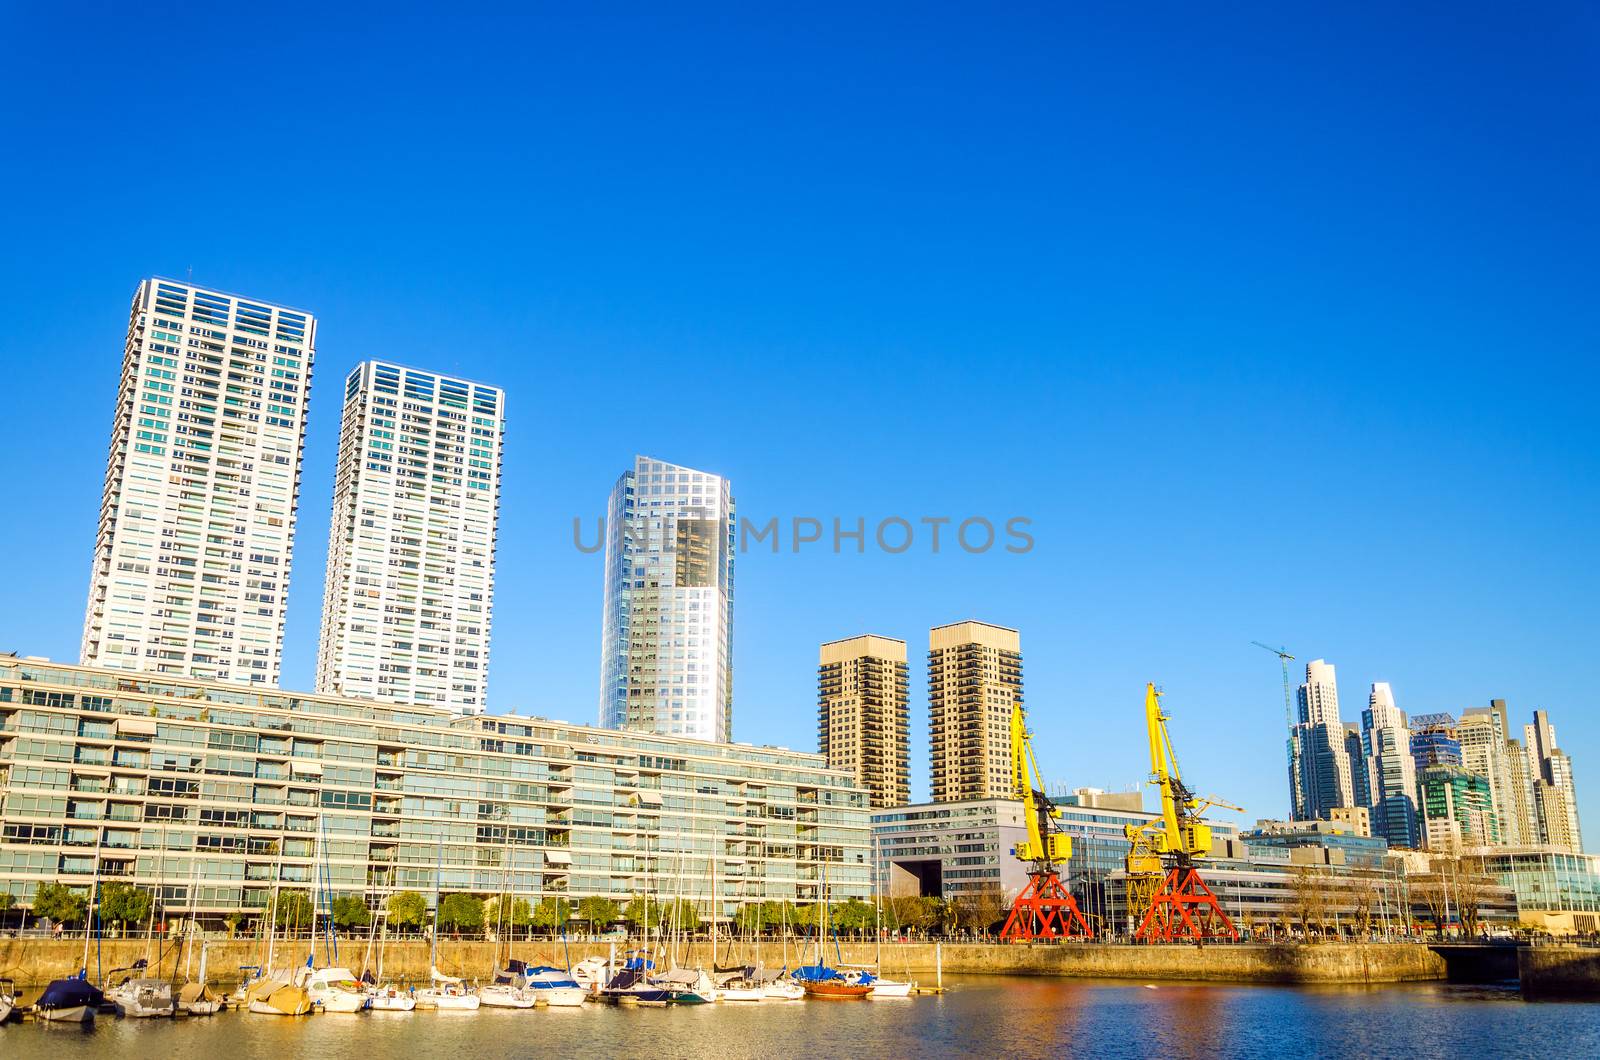 Buenos Aires Waterfront by jkraft5